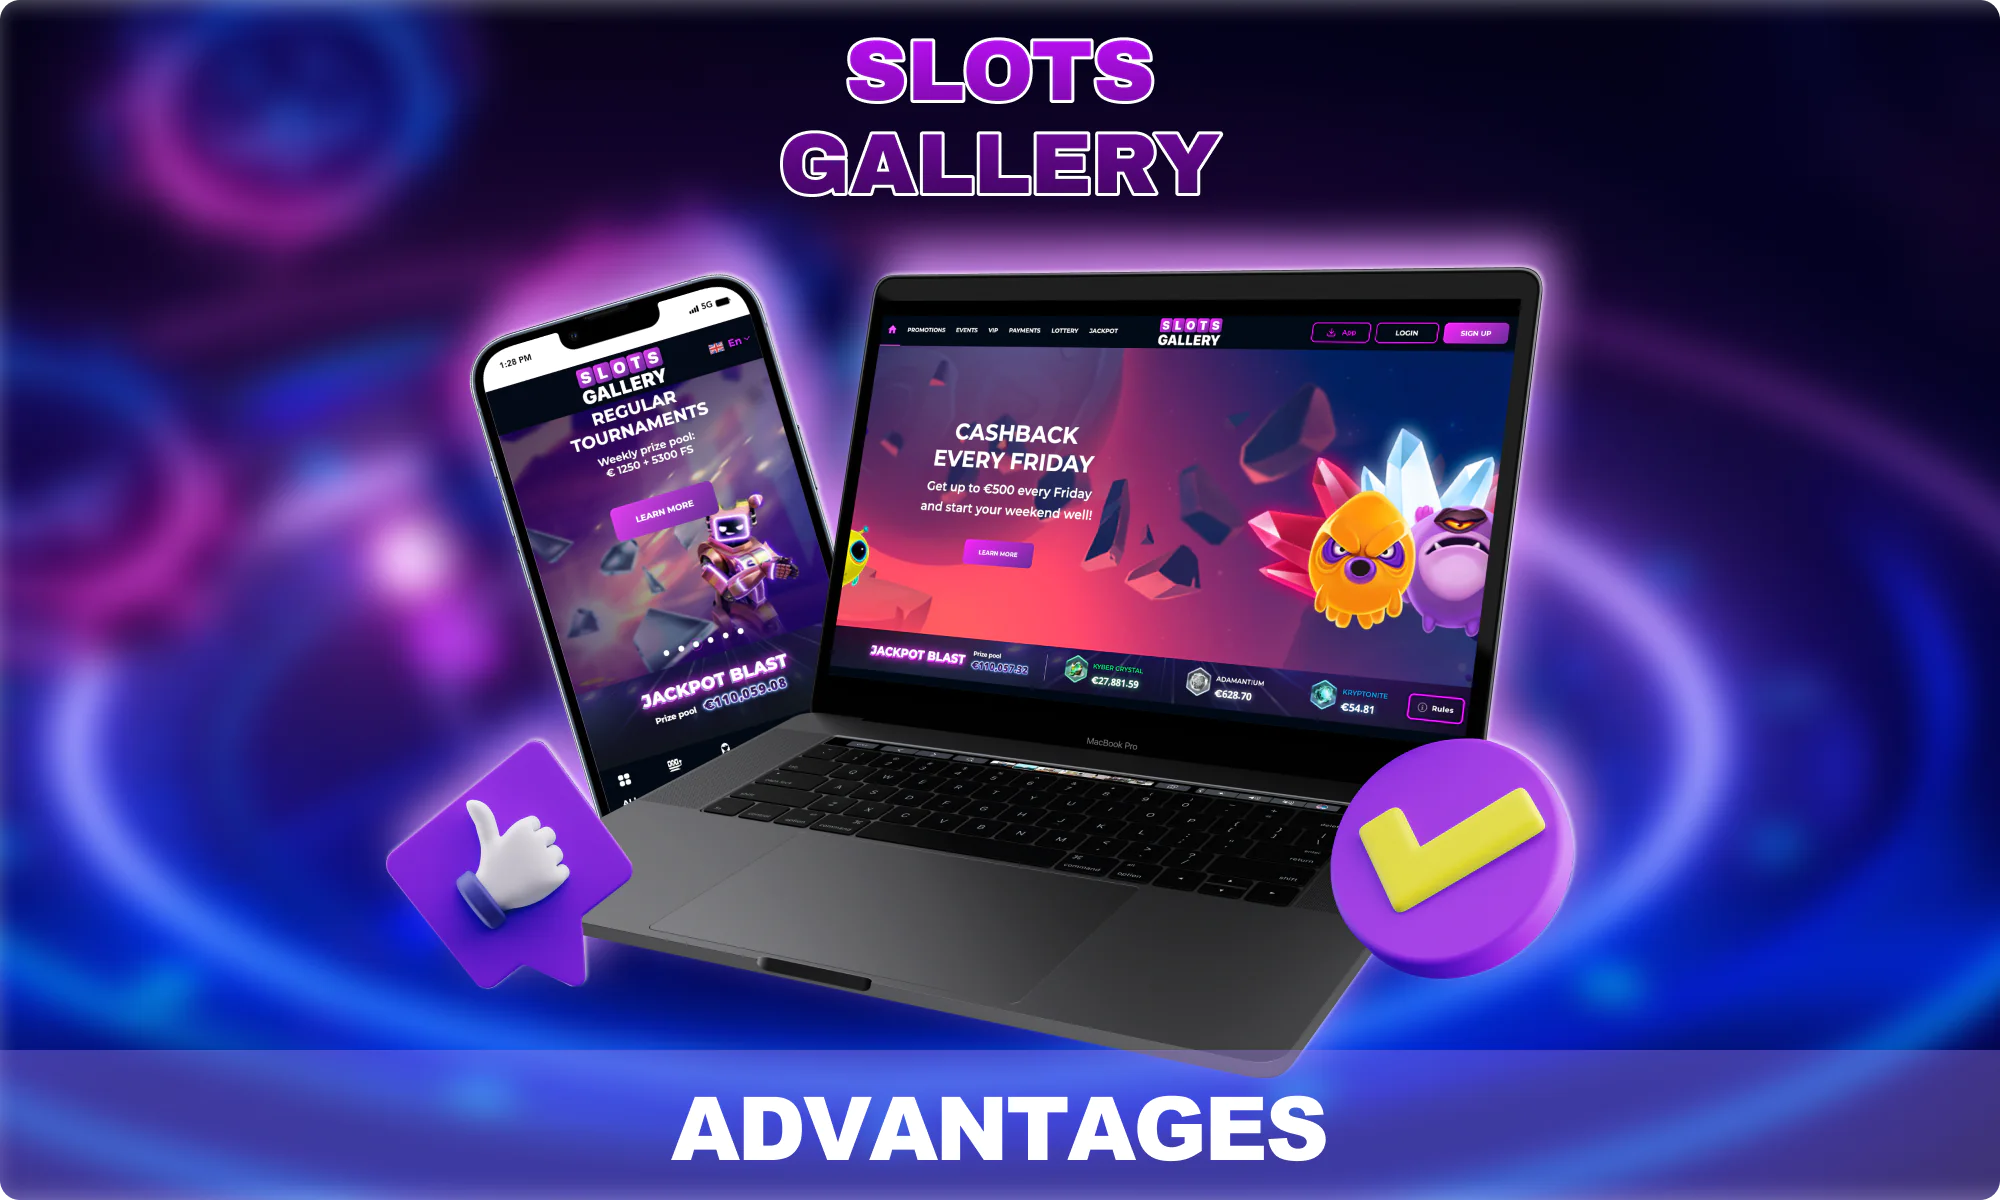 Advantages of Slots Gallery Casino